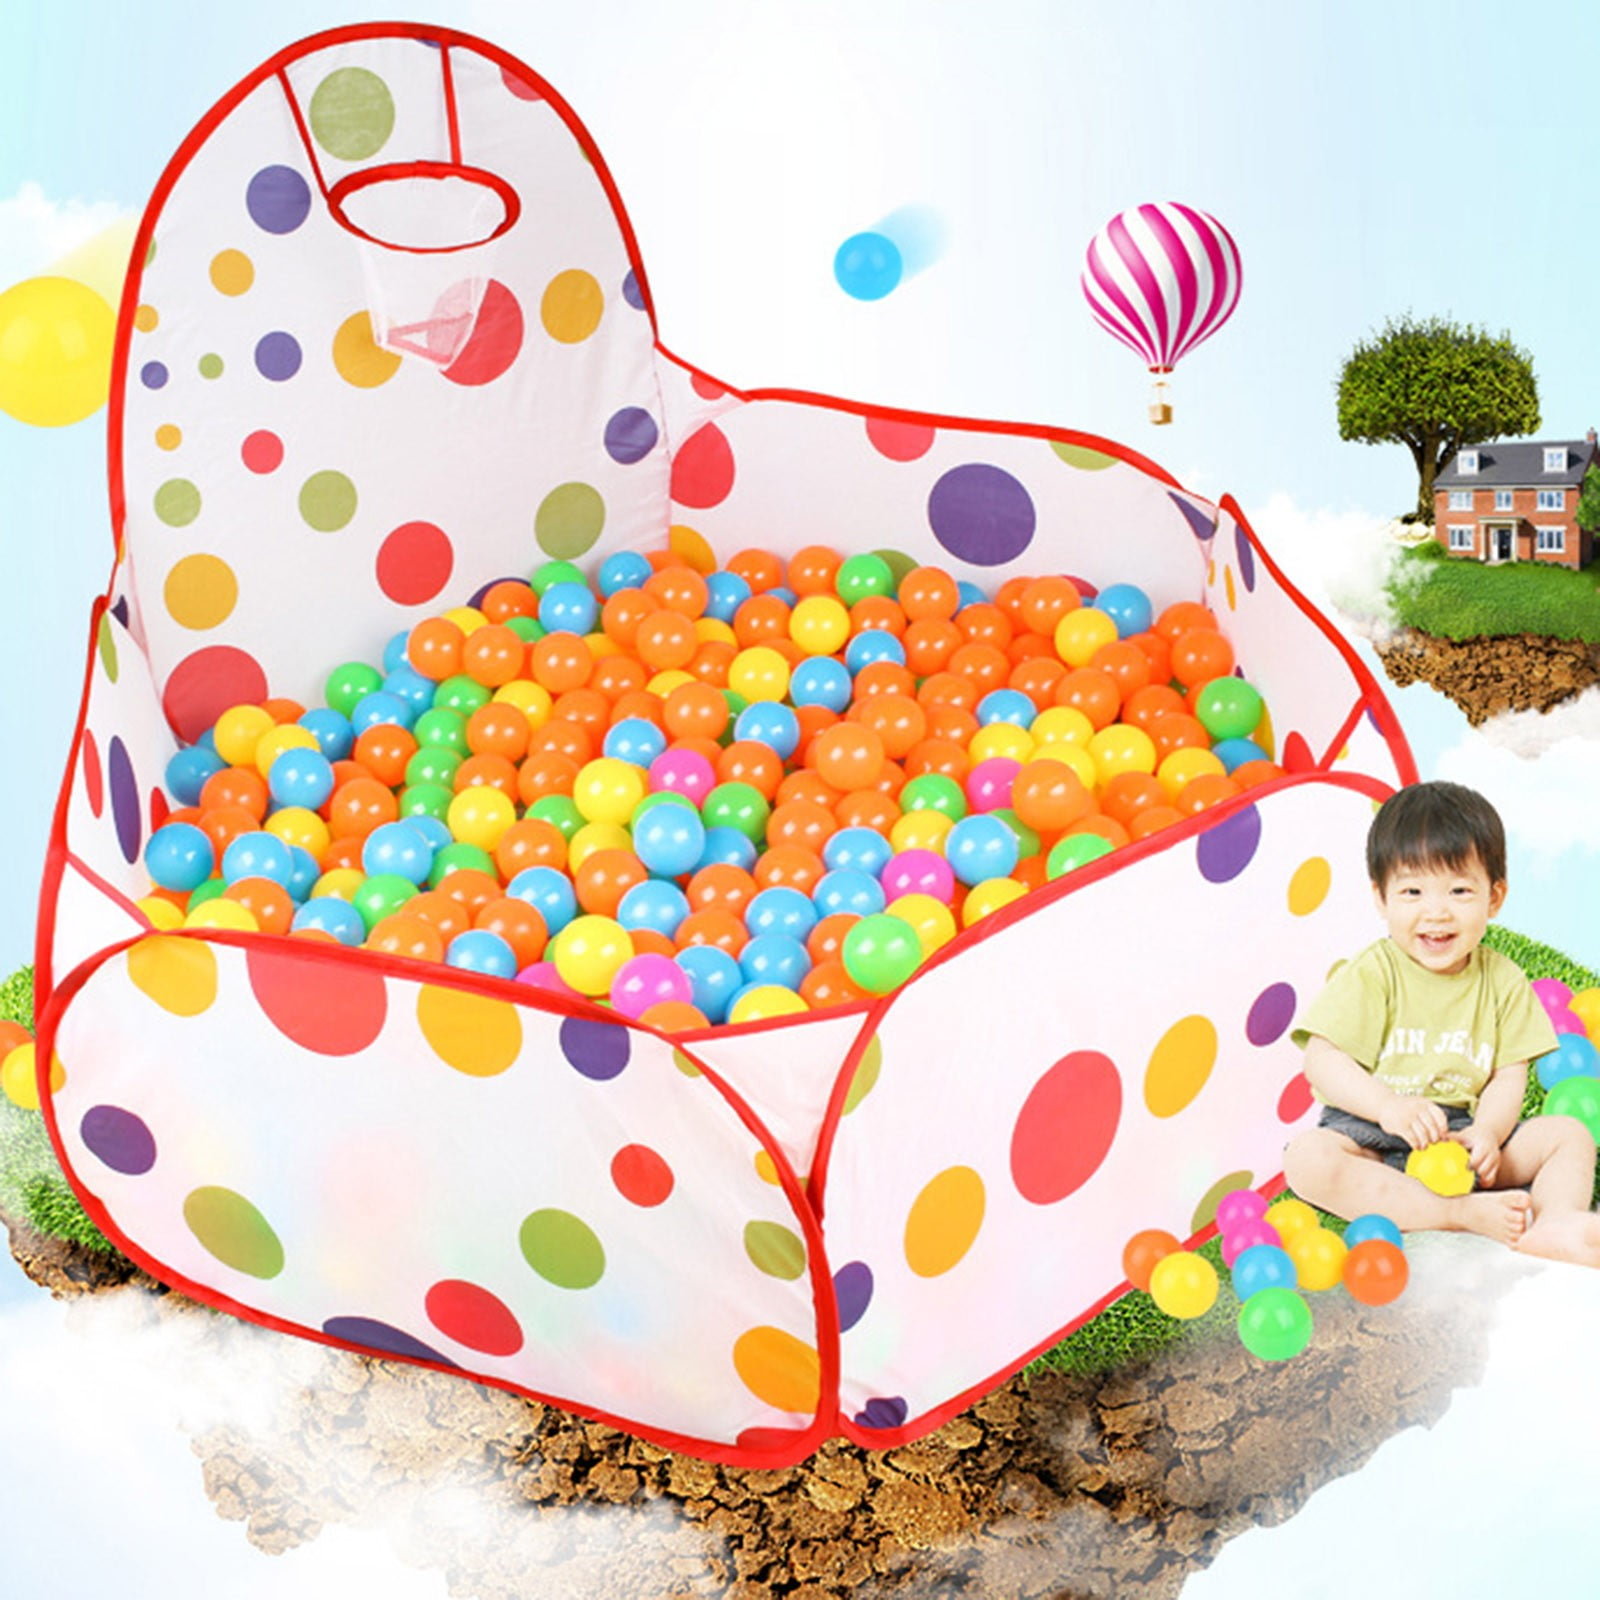 Kids Popup Ball Pit Pool Play Tent Hut Indoor Outdoor Playhouse Nursery Game Toy 